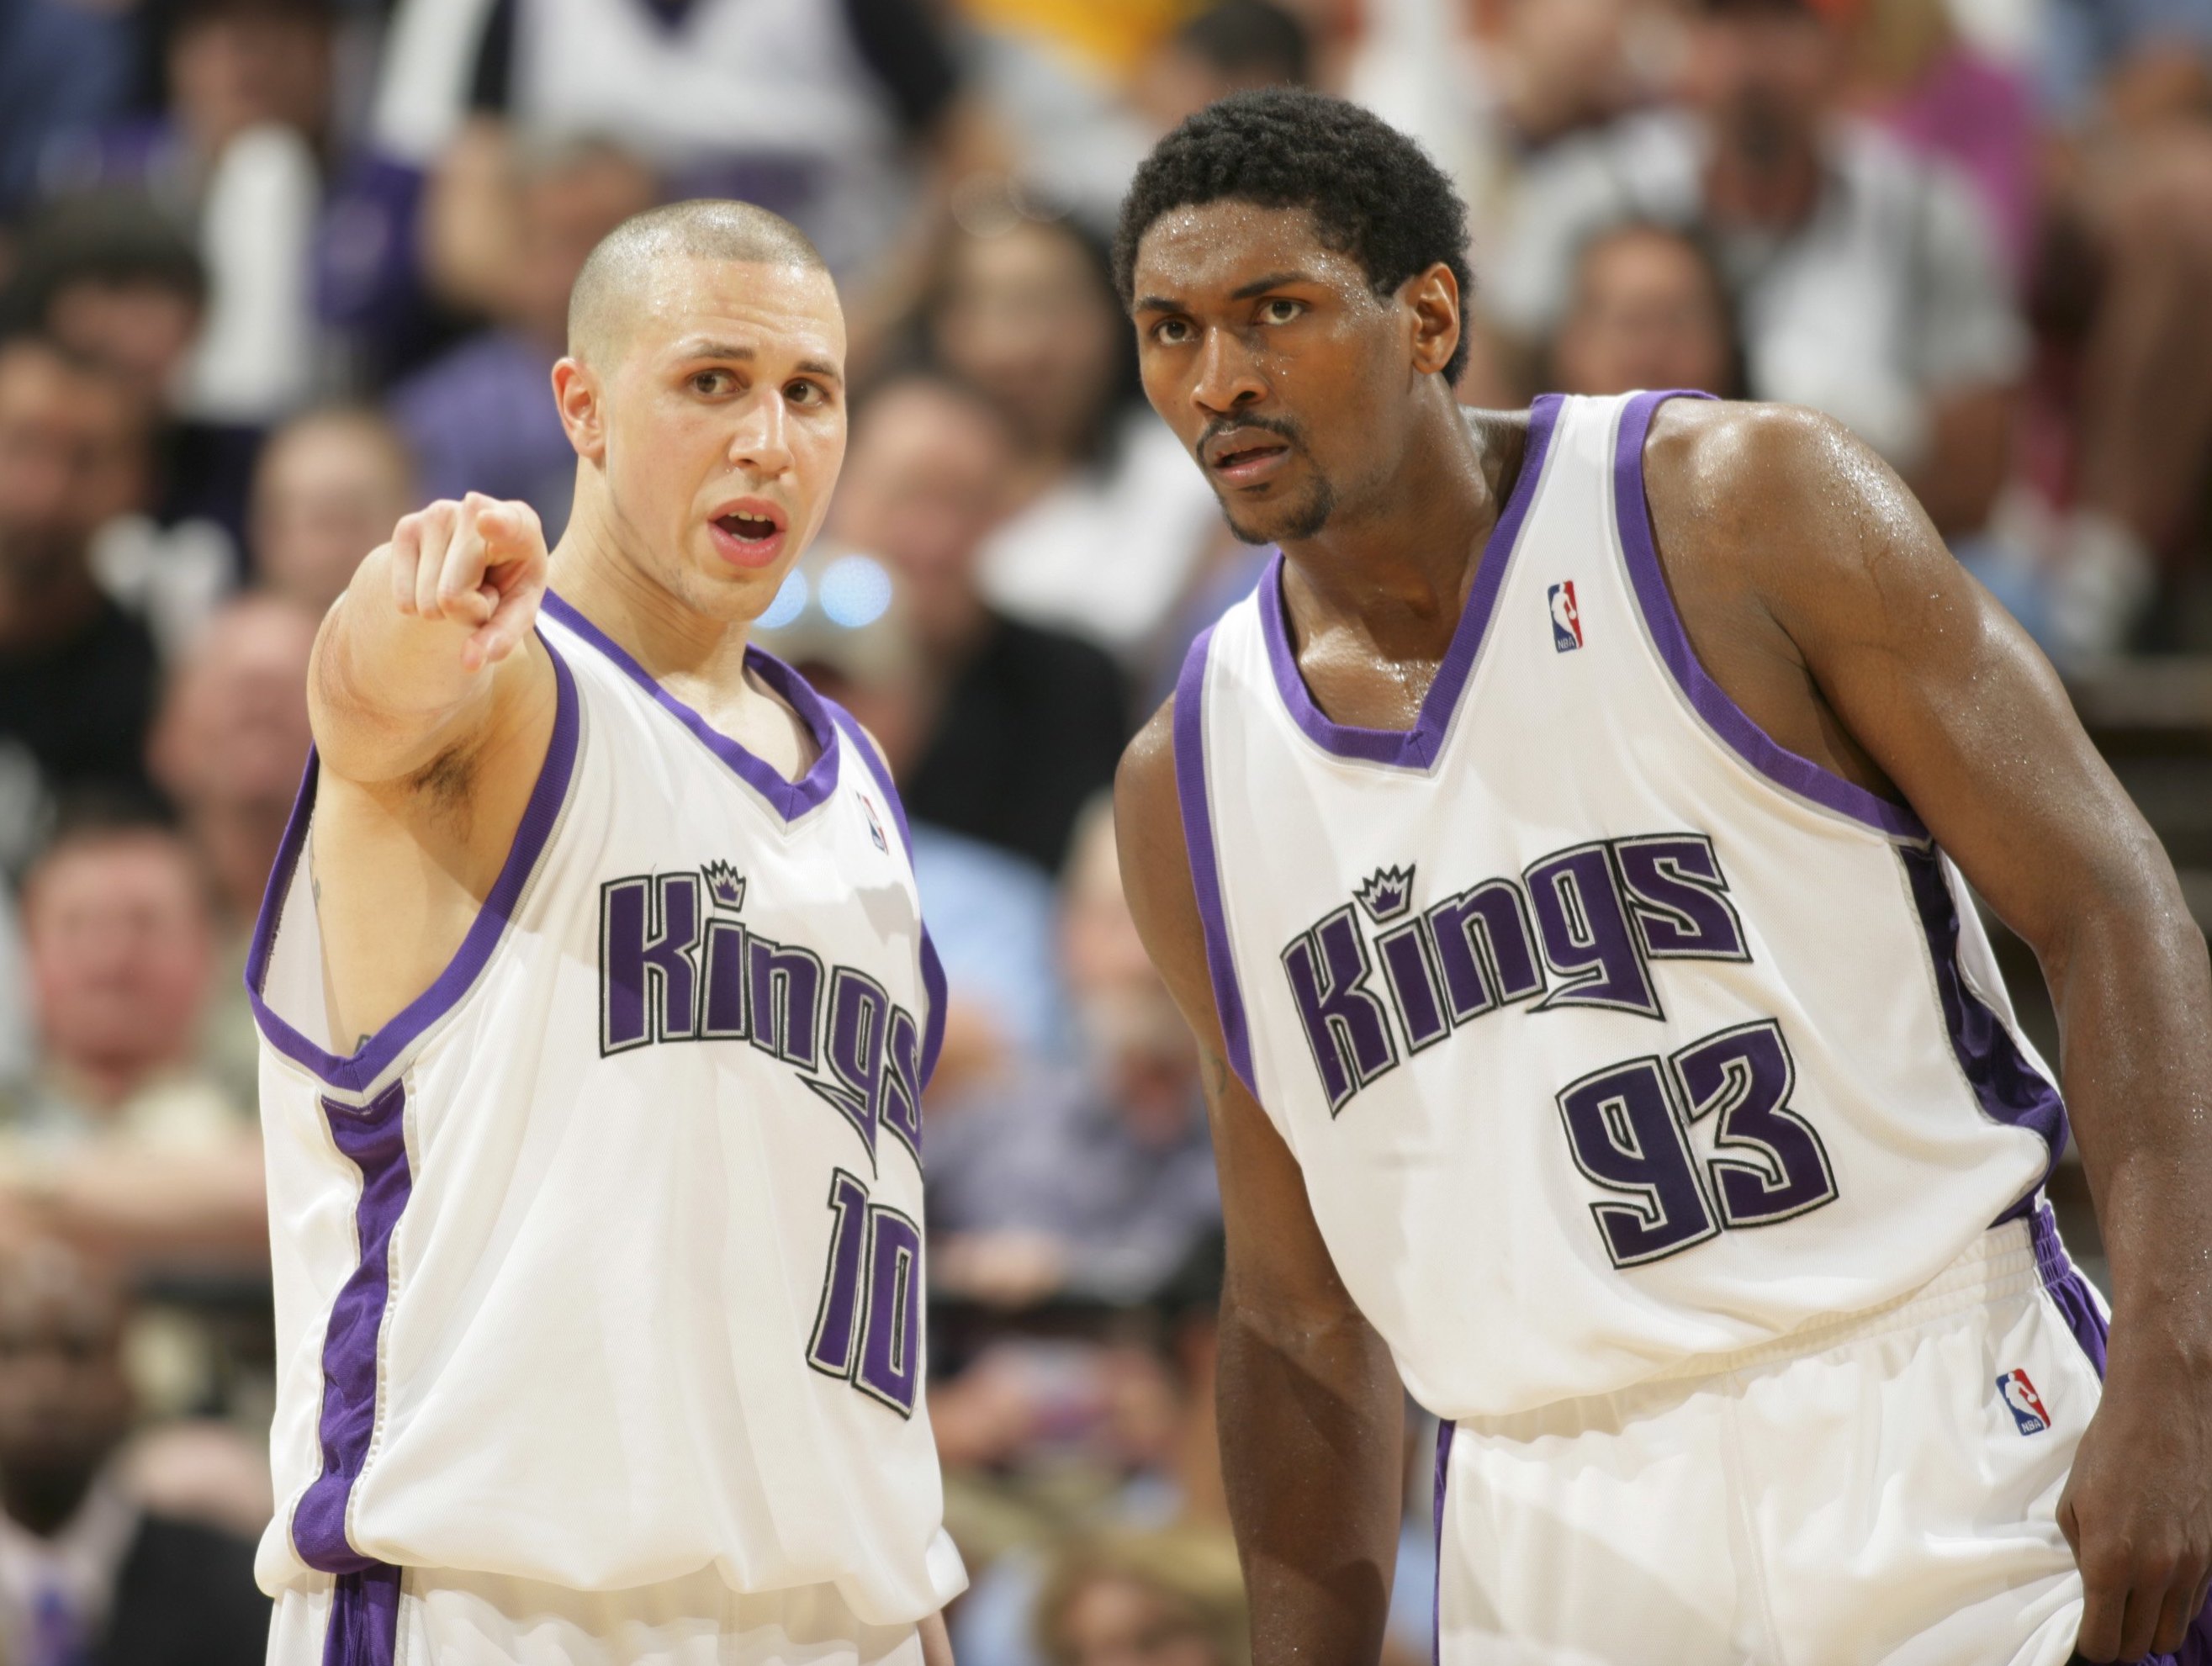 Sacramento Kings: When was the last time they made the playoffs?